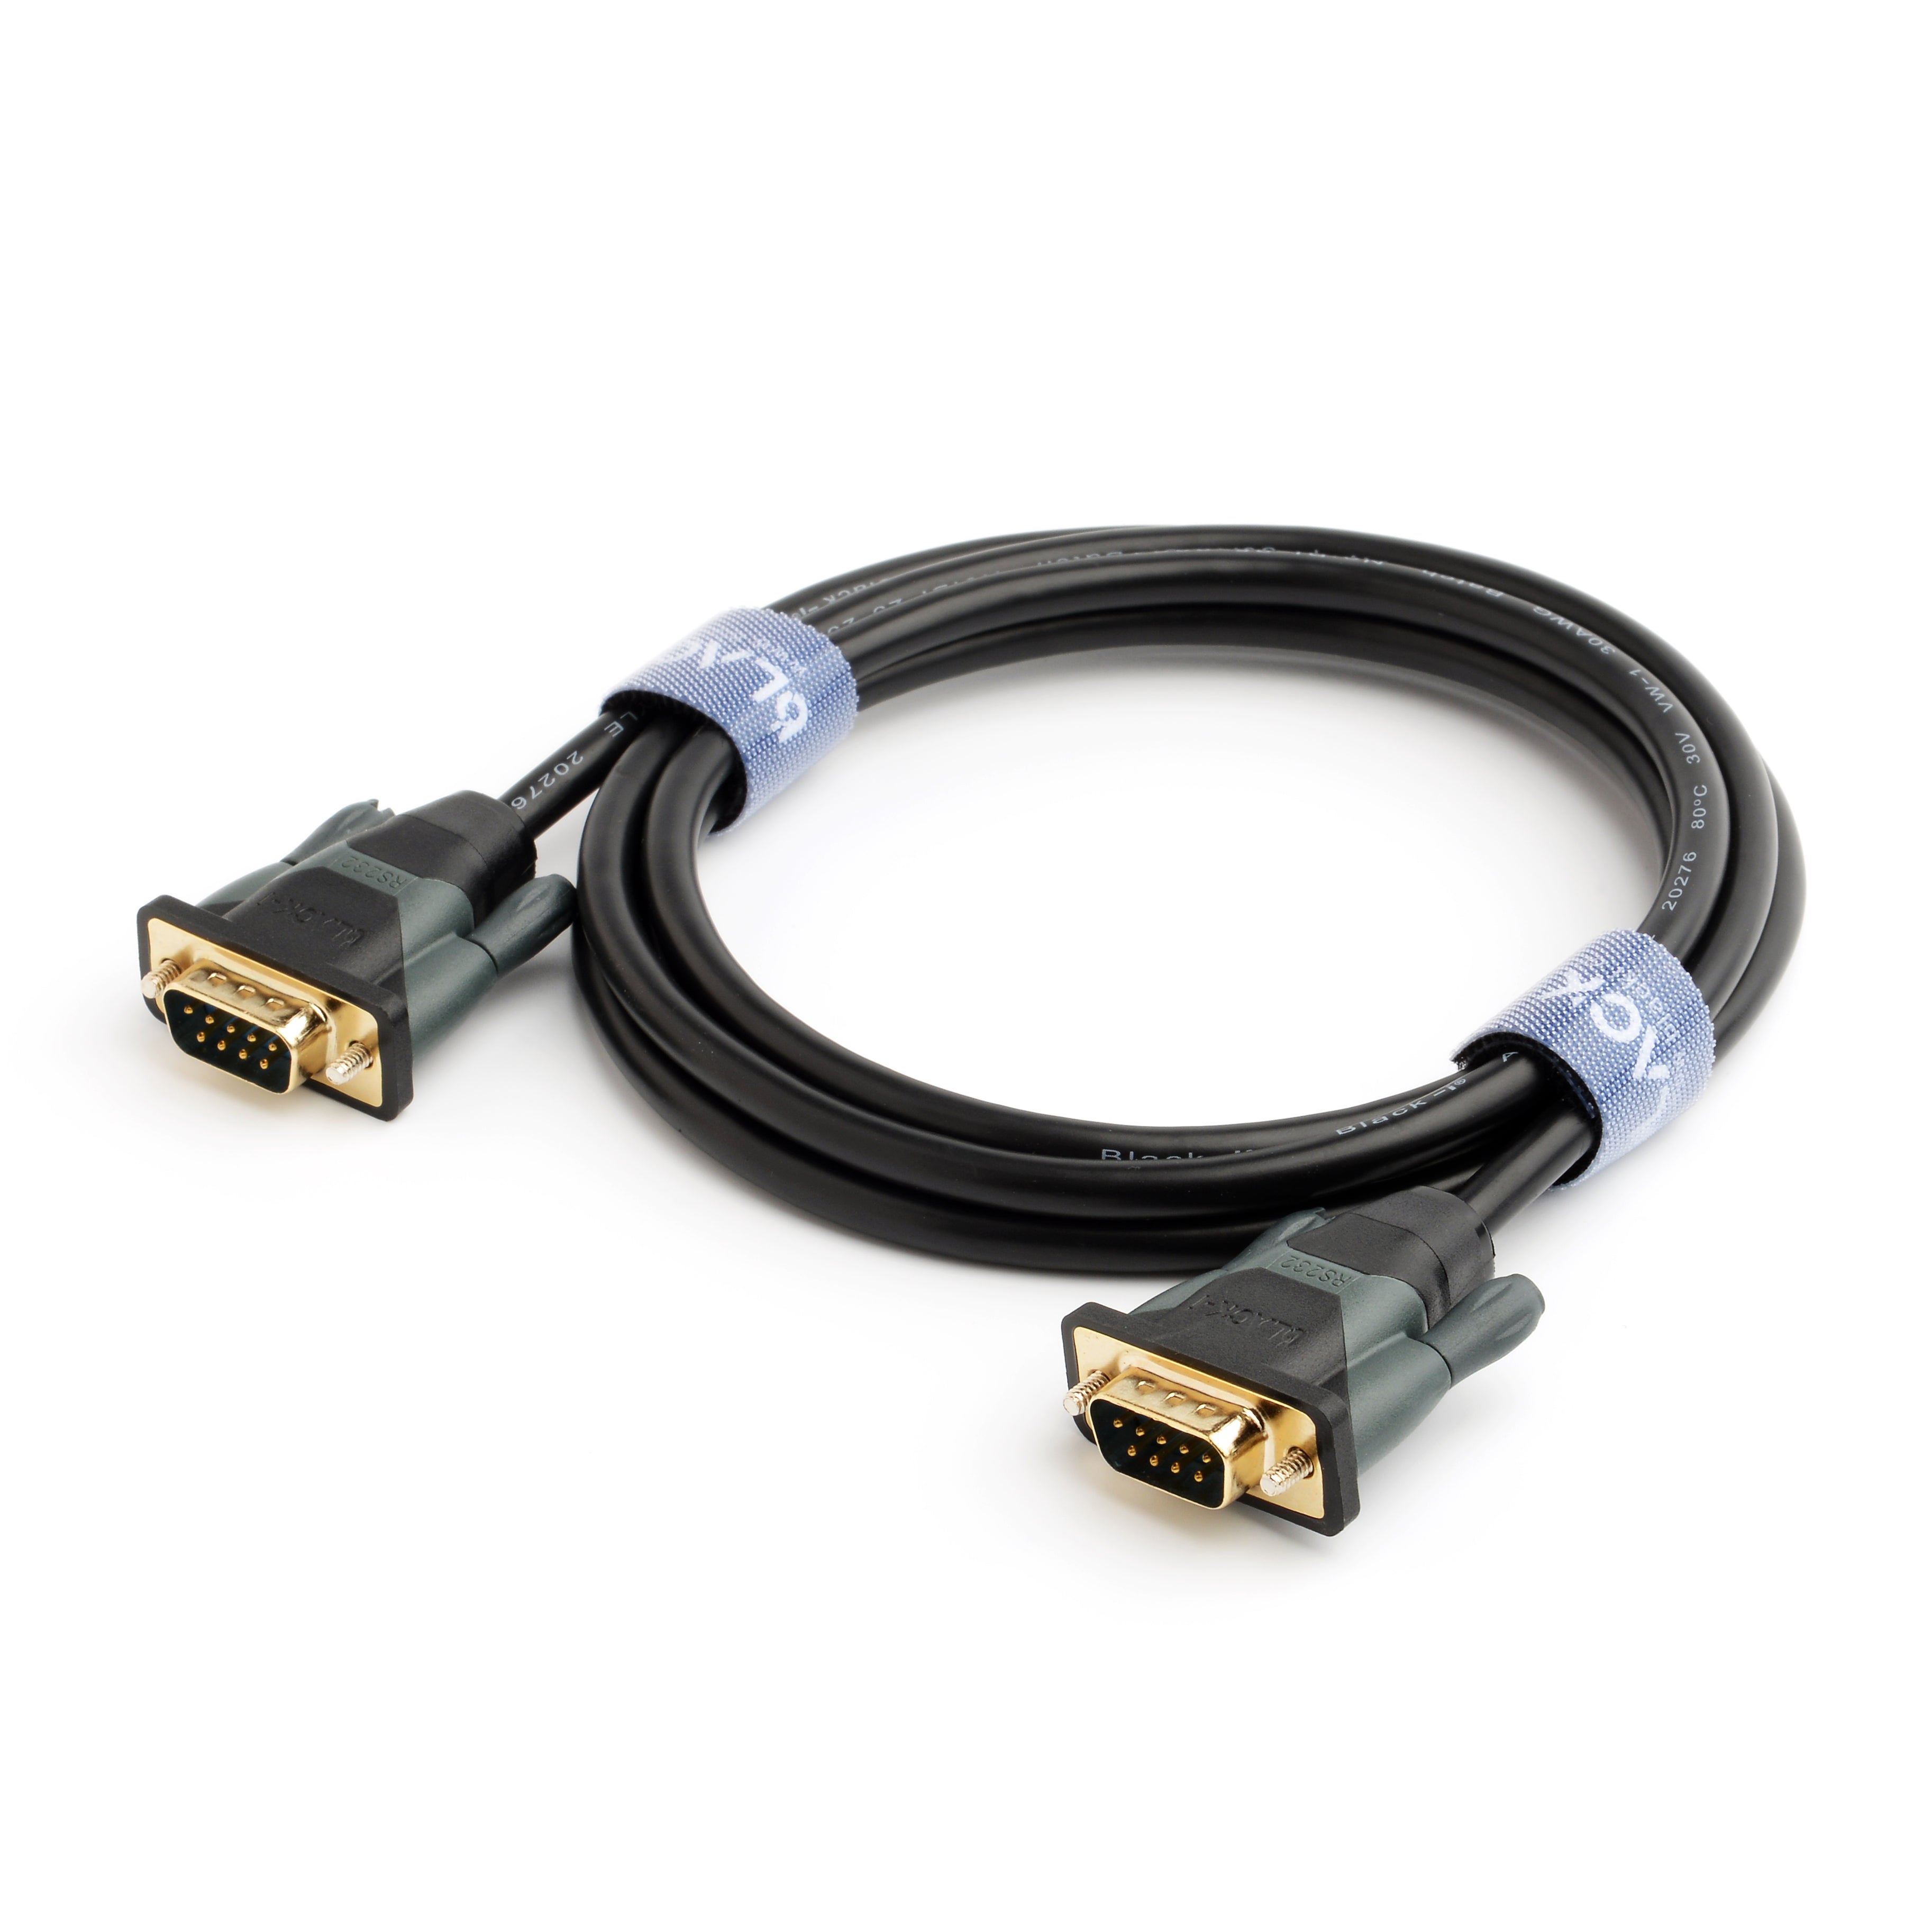 Black-i 9 pin RS232 Cable